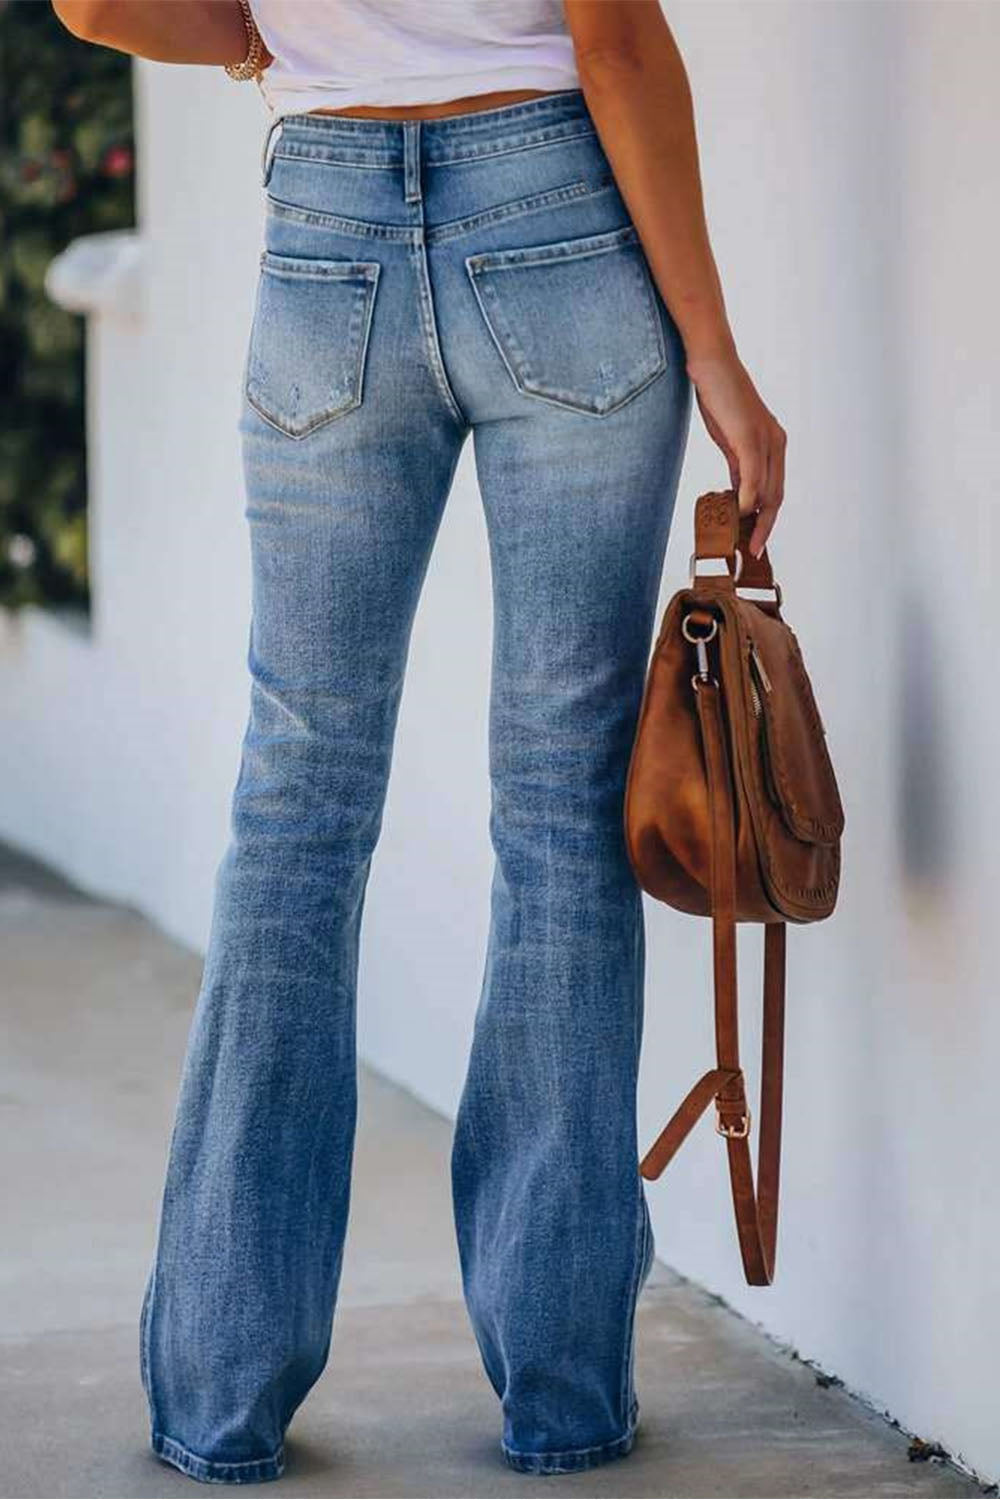 Plain Jane Relaxed Fit Jeans